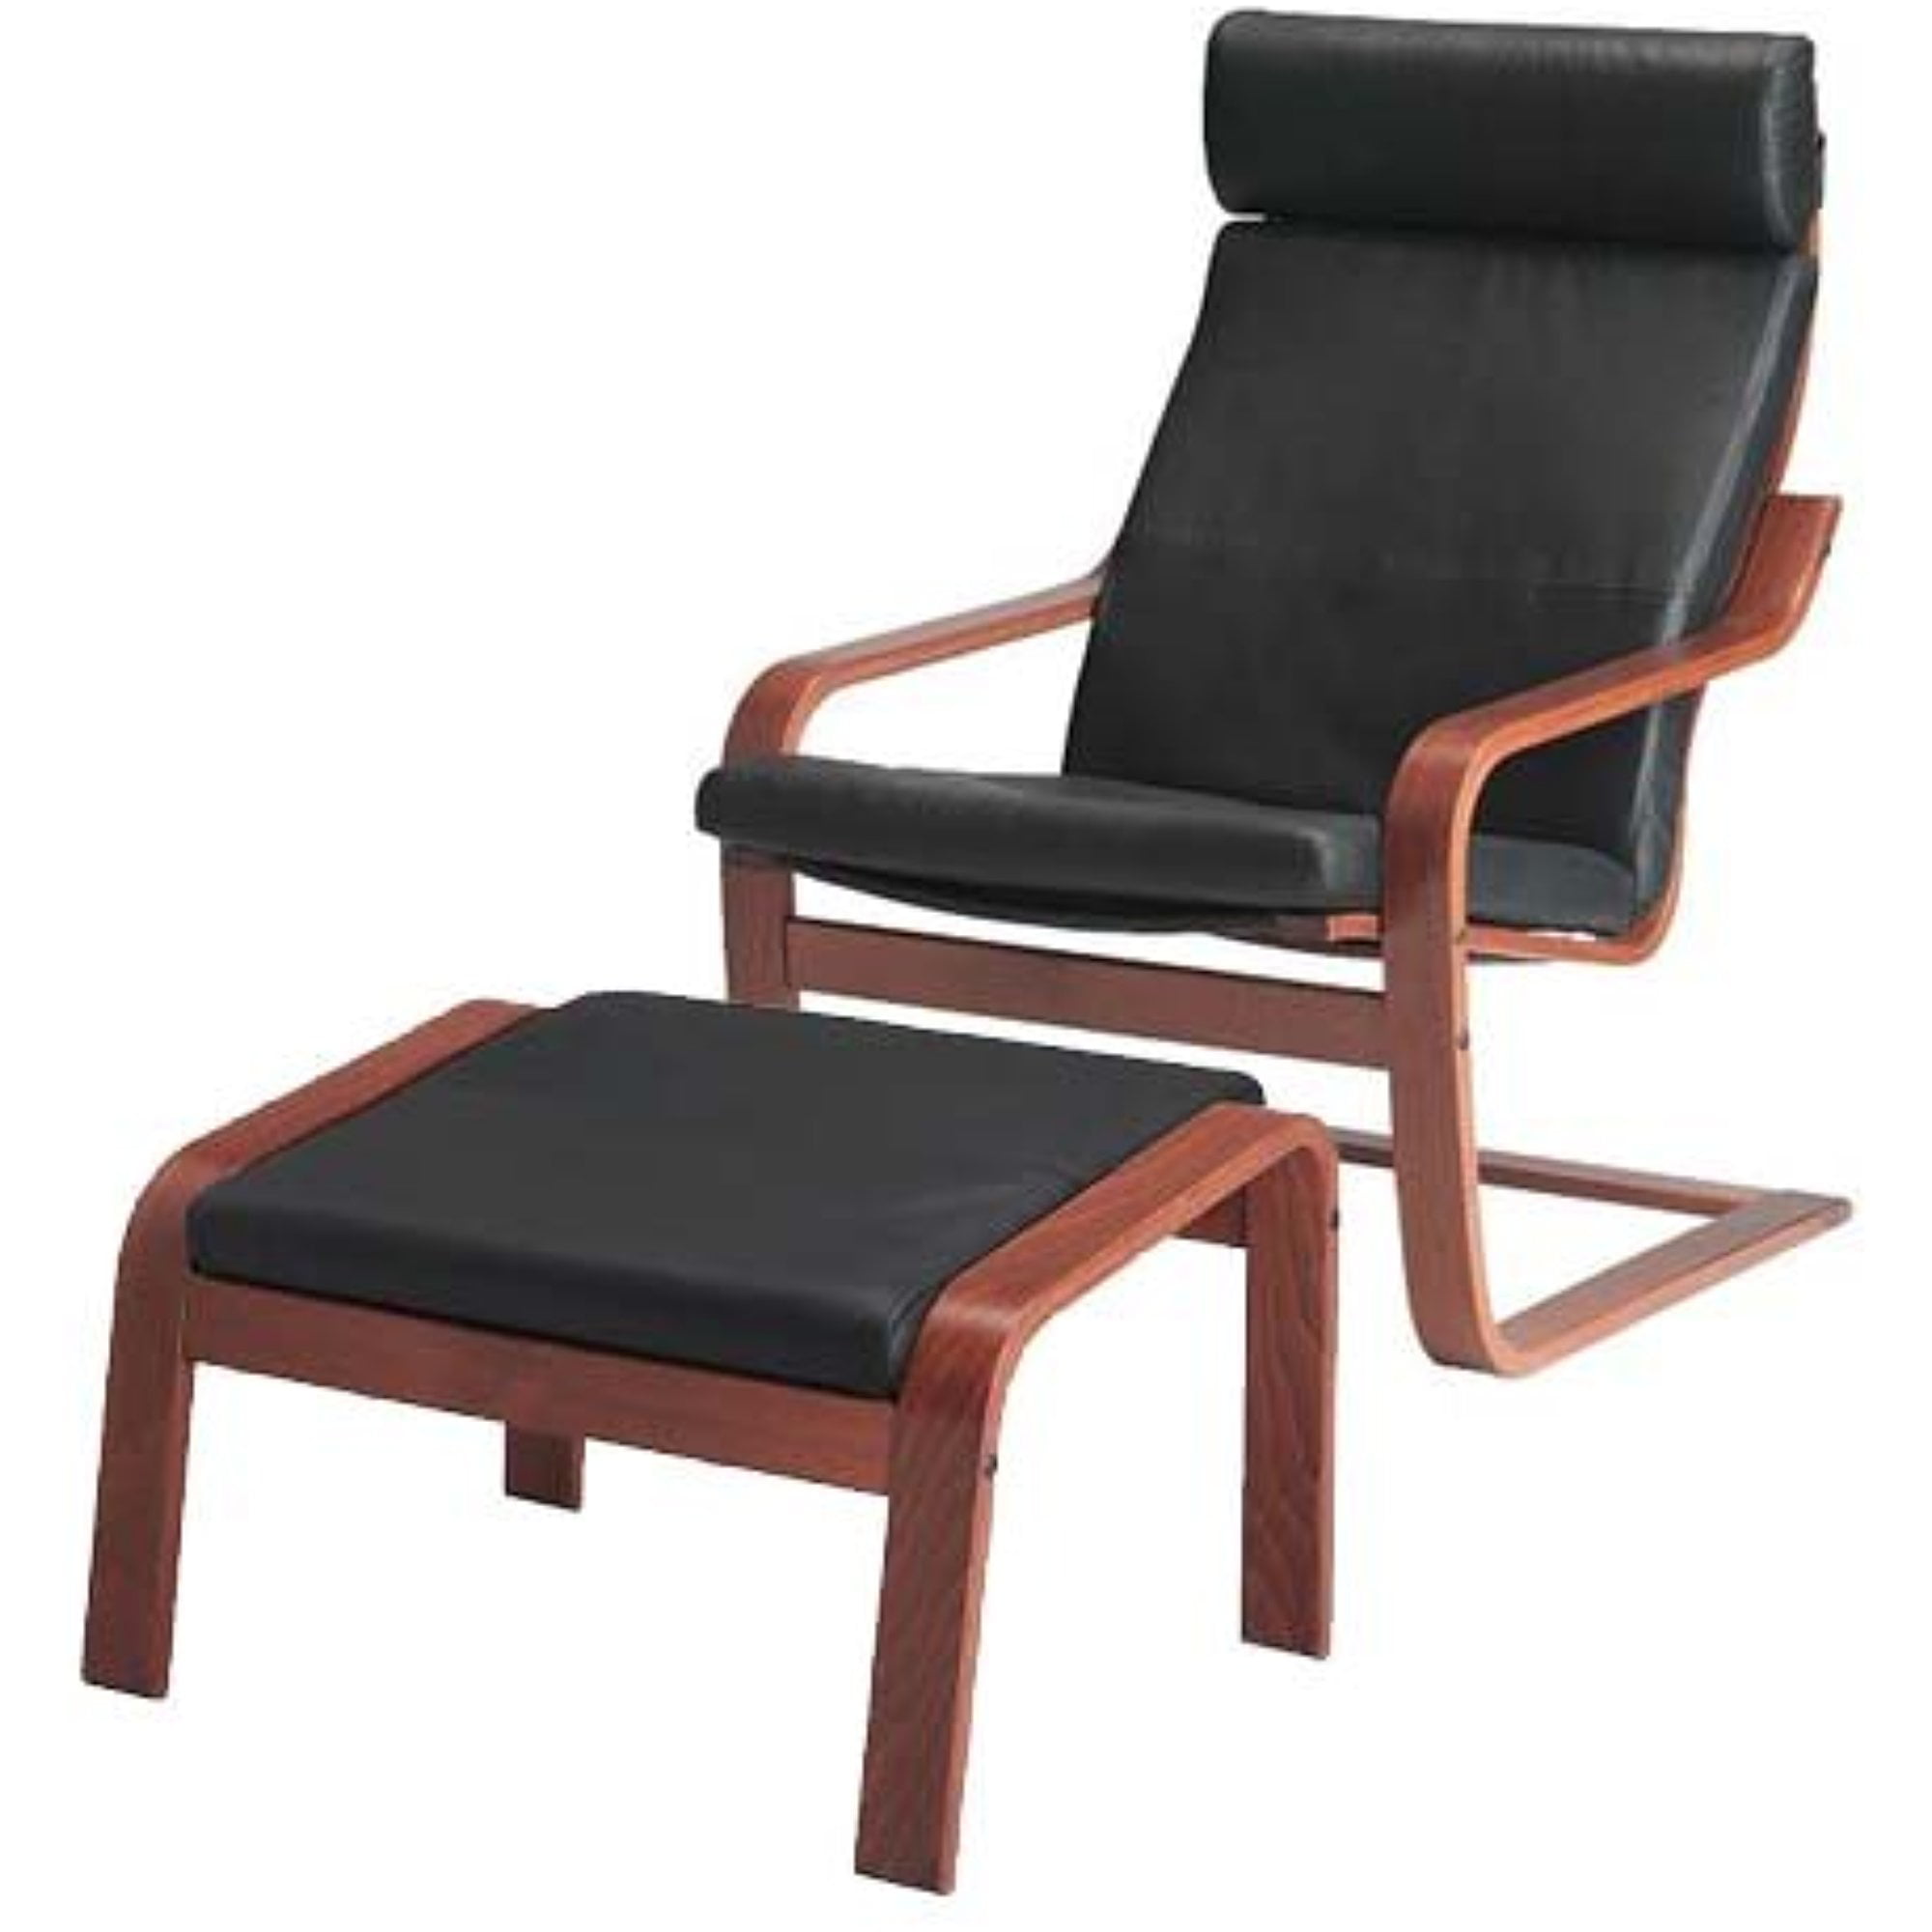 Ikea Poang Chair Armchair And Footstool, Ikea Leather Armchair